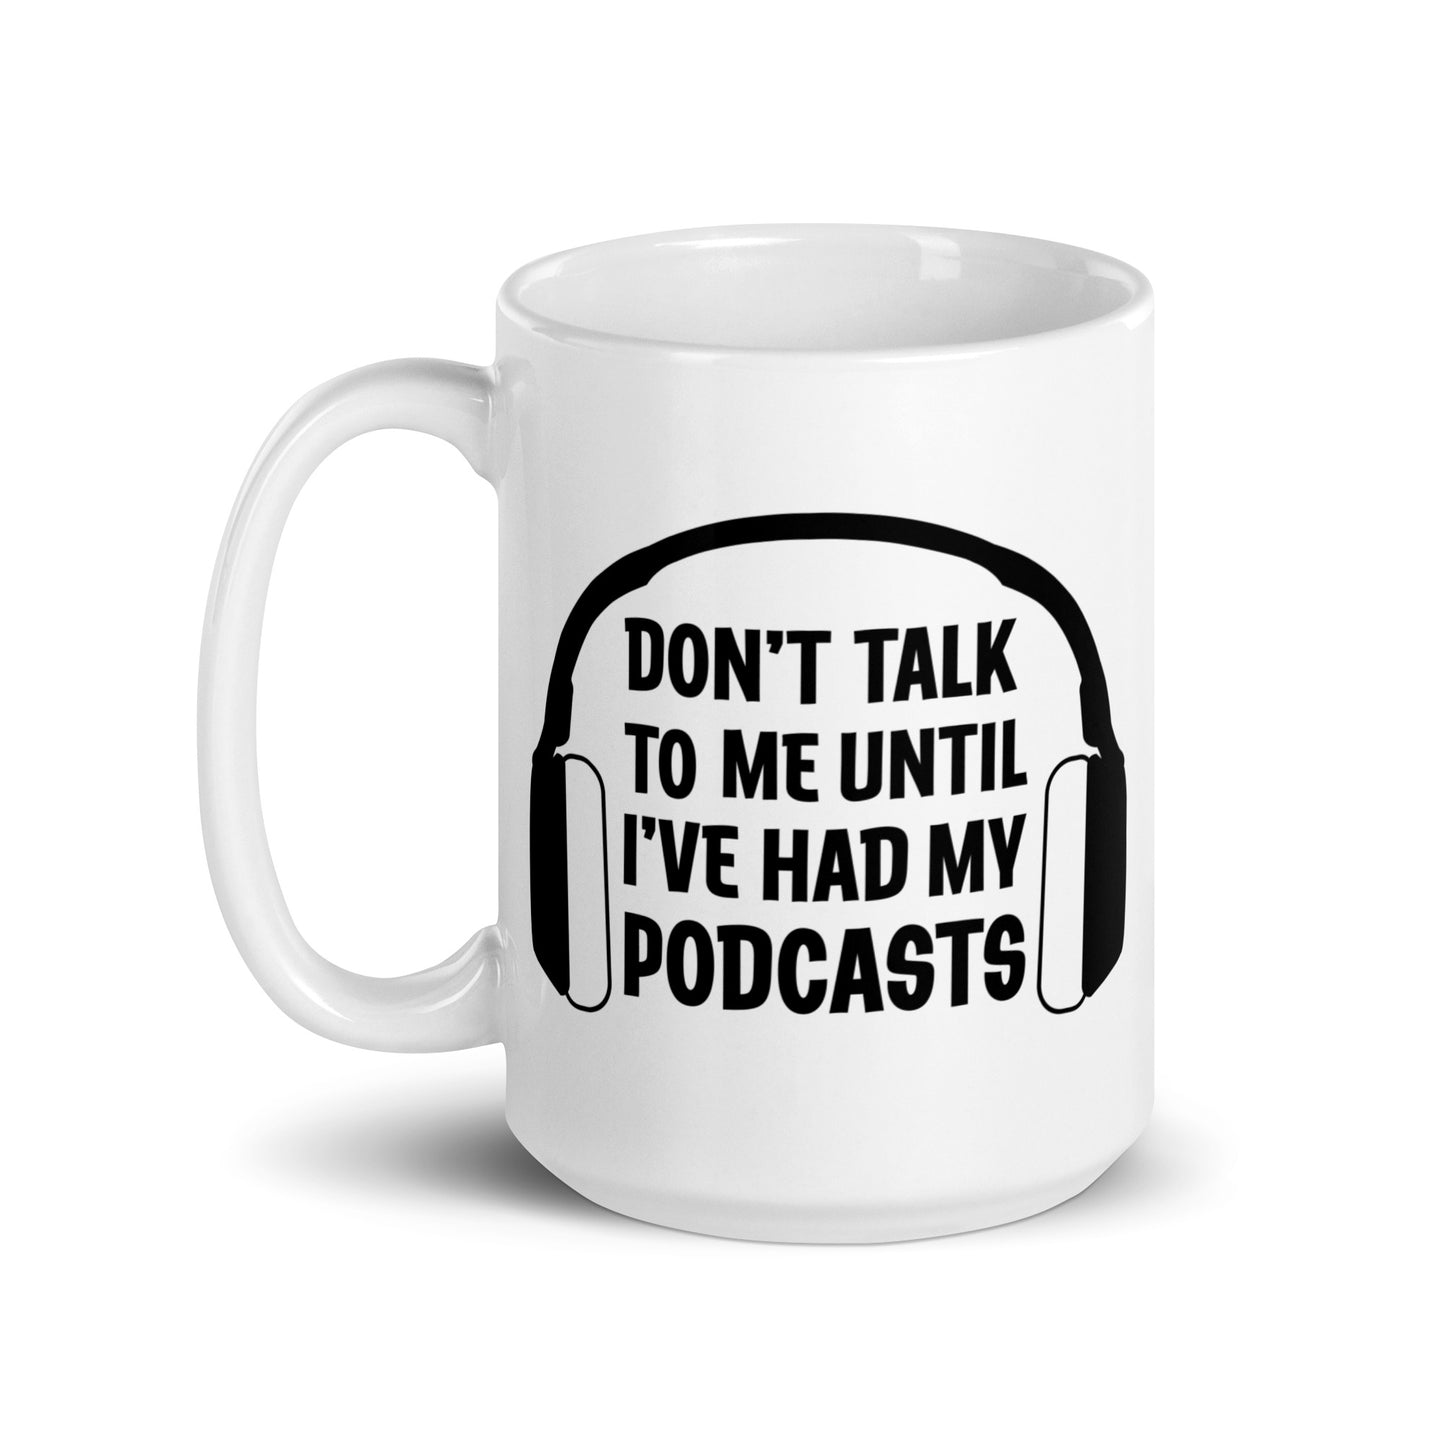 A white 15 ounce ceramic coffee mug featuring an image of headphones surrounding text reading "Don't talk to me until I've had my podcasts"